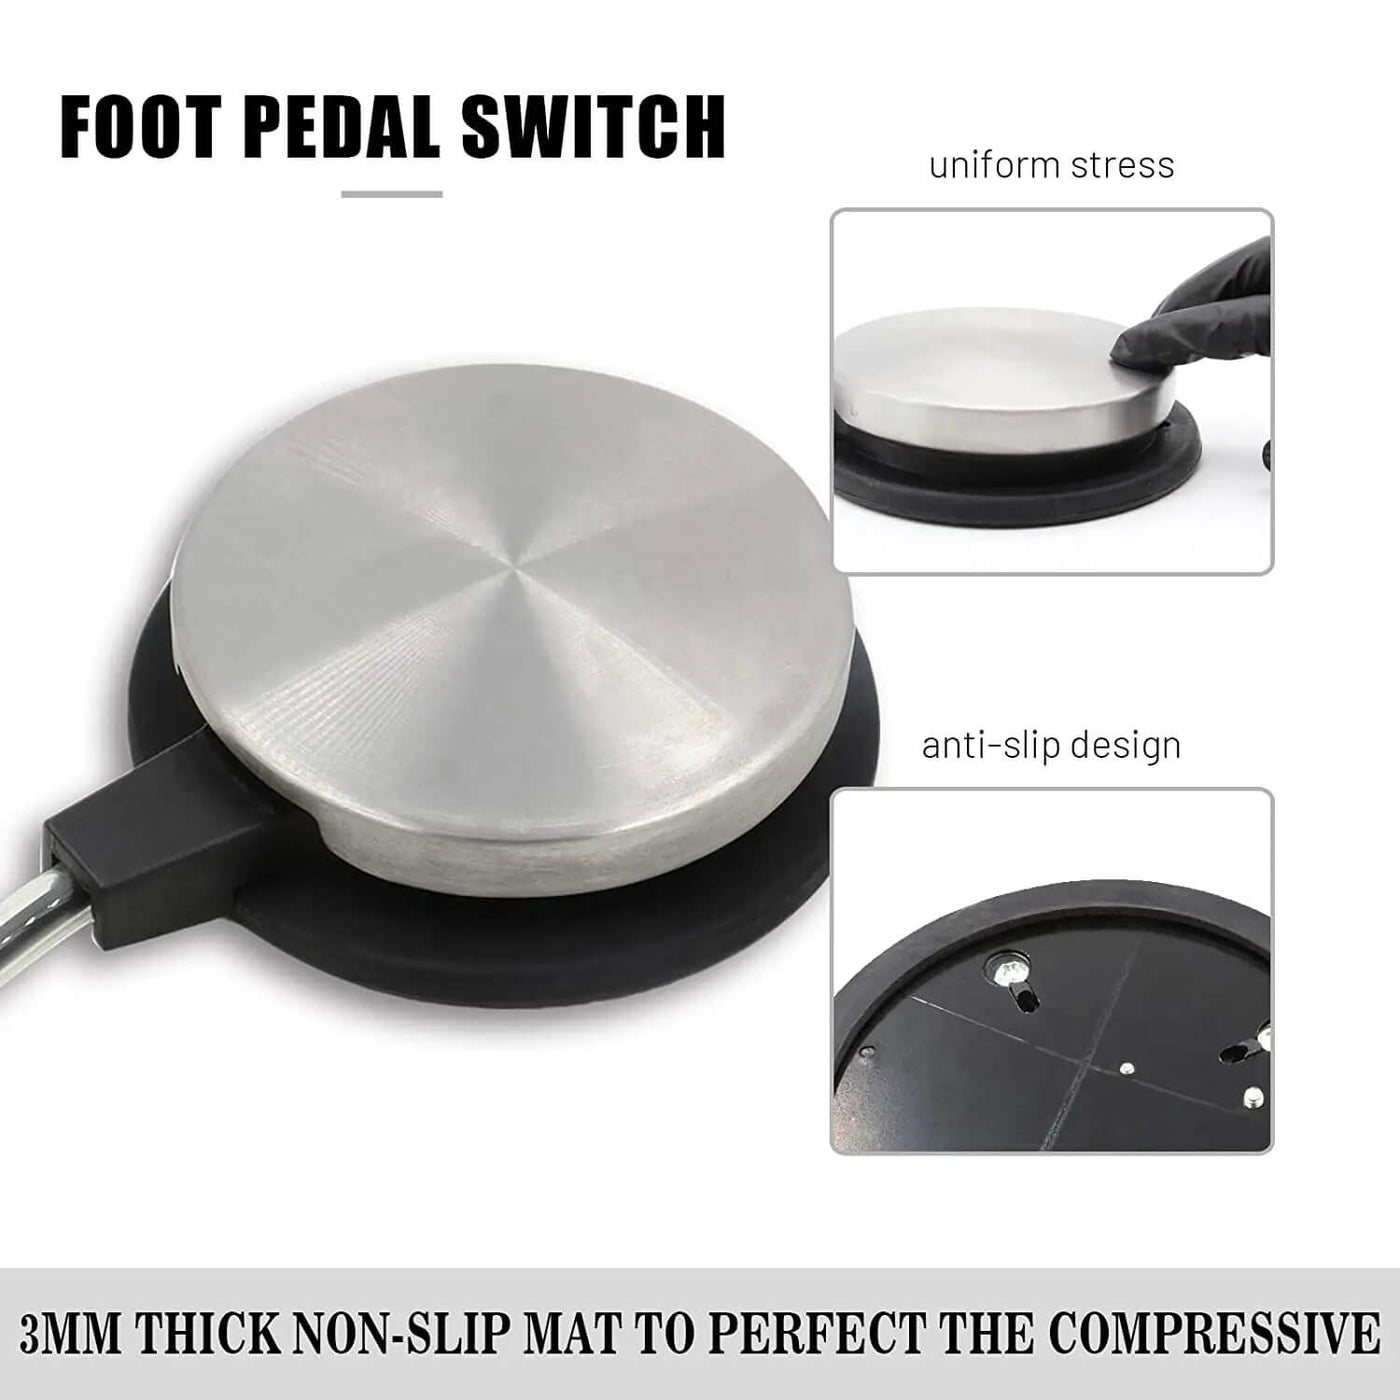 Heavy Duty Stainless Steel Tattoo Foot Pedal Switch